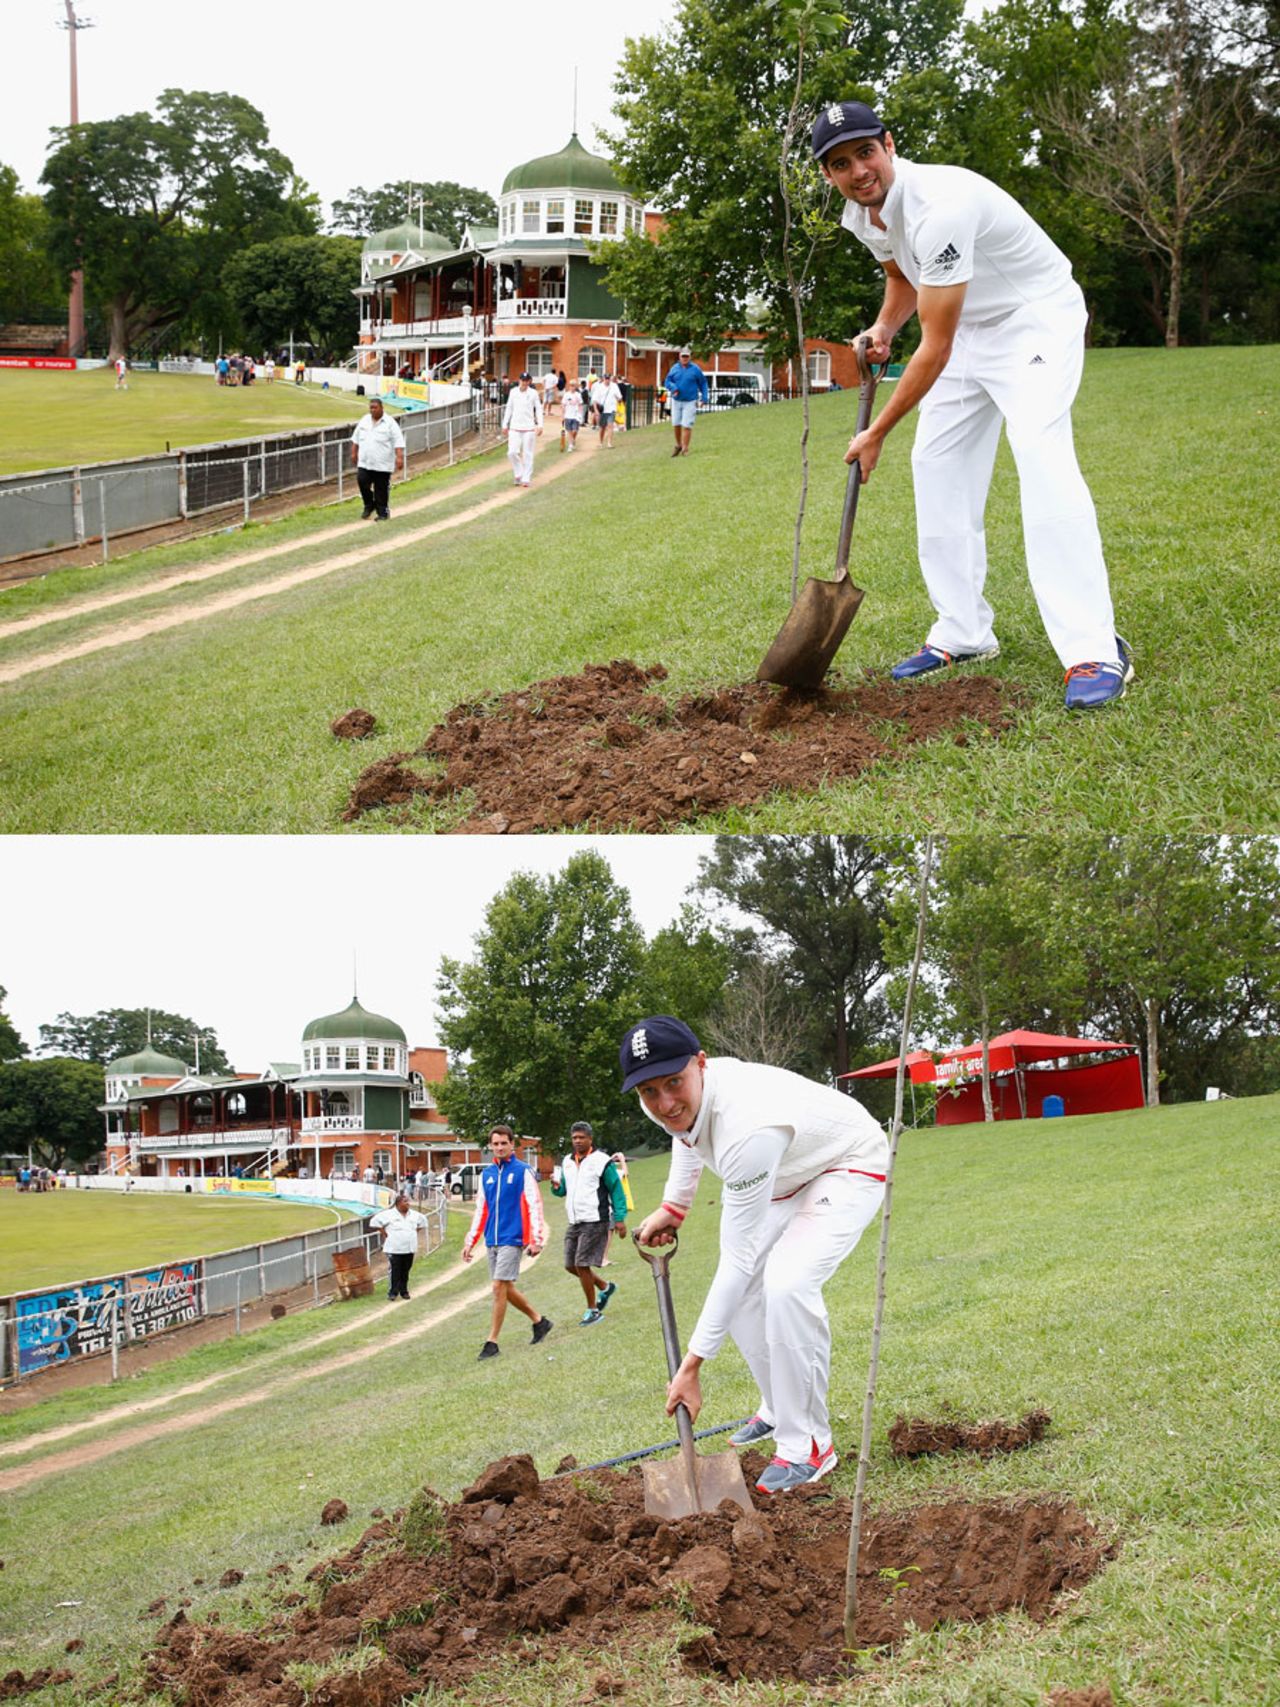 Alastair Cook and Joe Root planted trees following their hundreds against South Africa A, South Africa A v England XI, Tour match, Pietermaritzburg, December 22, 2015